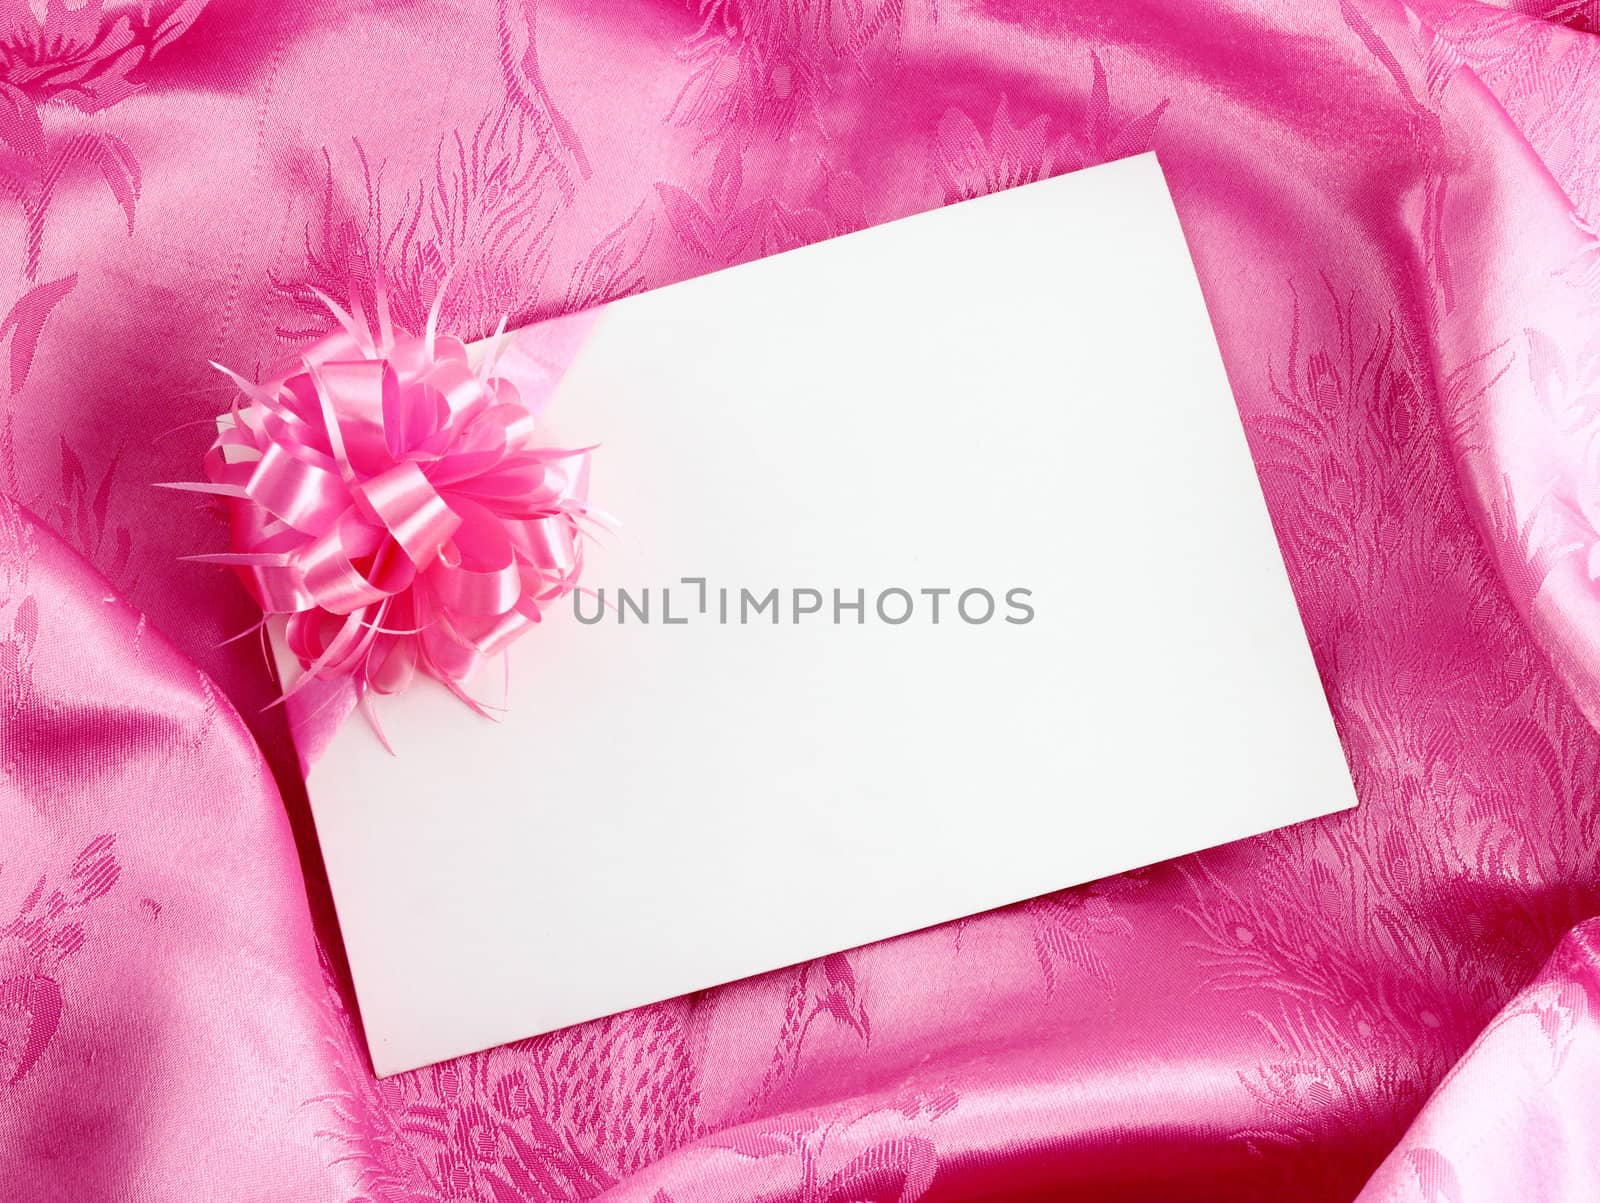 Blank gift card with ribbon on pink satin